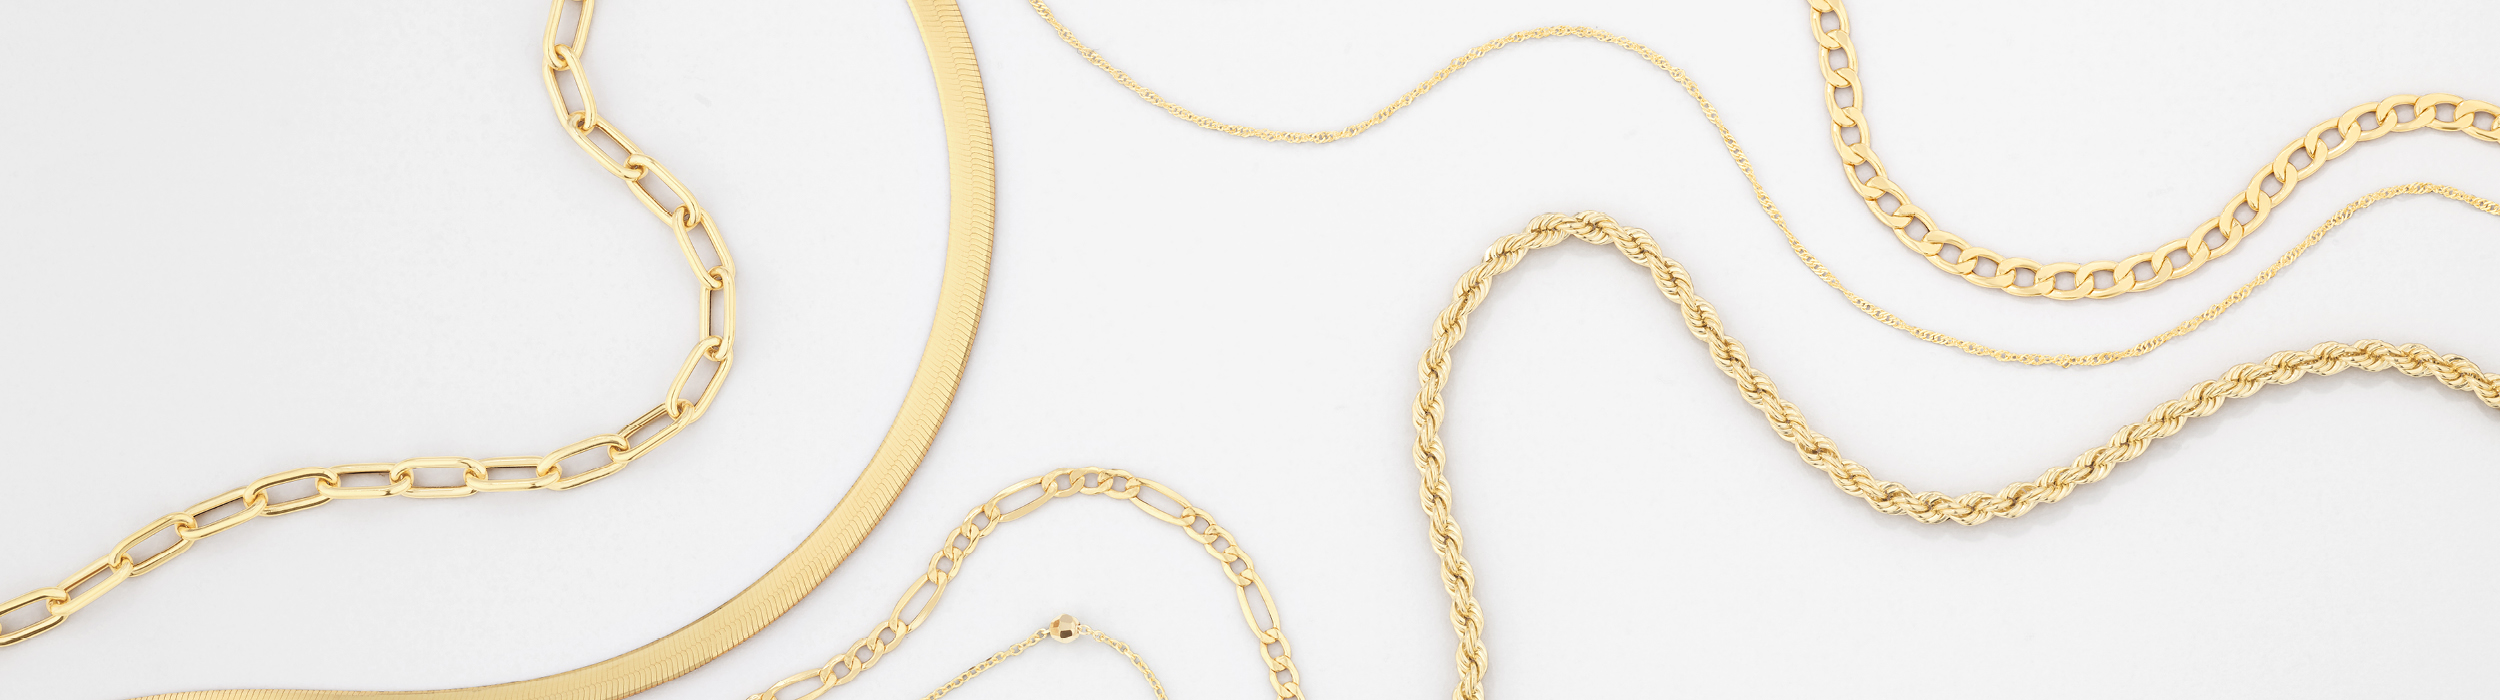 Flatlay of yellow gold chains